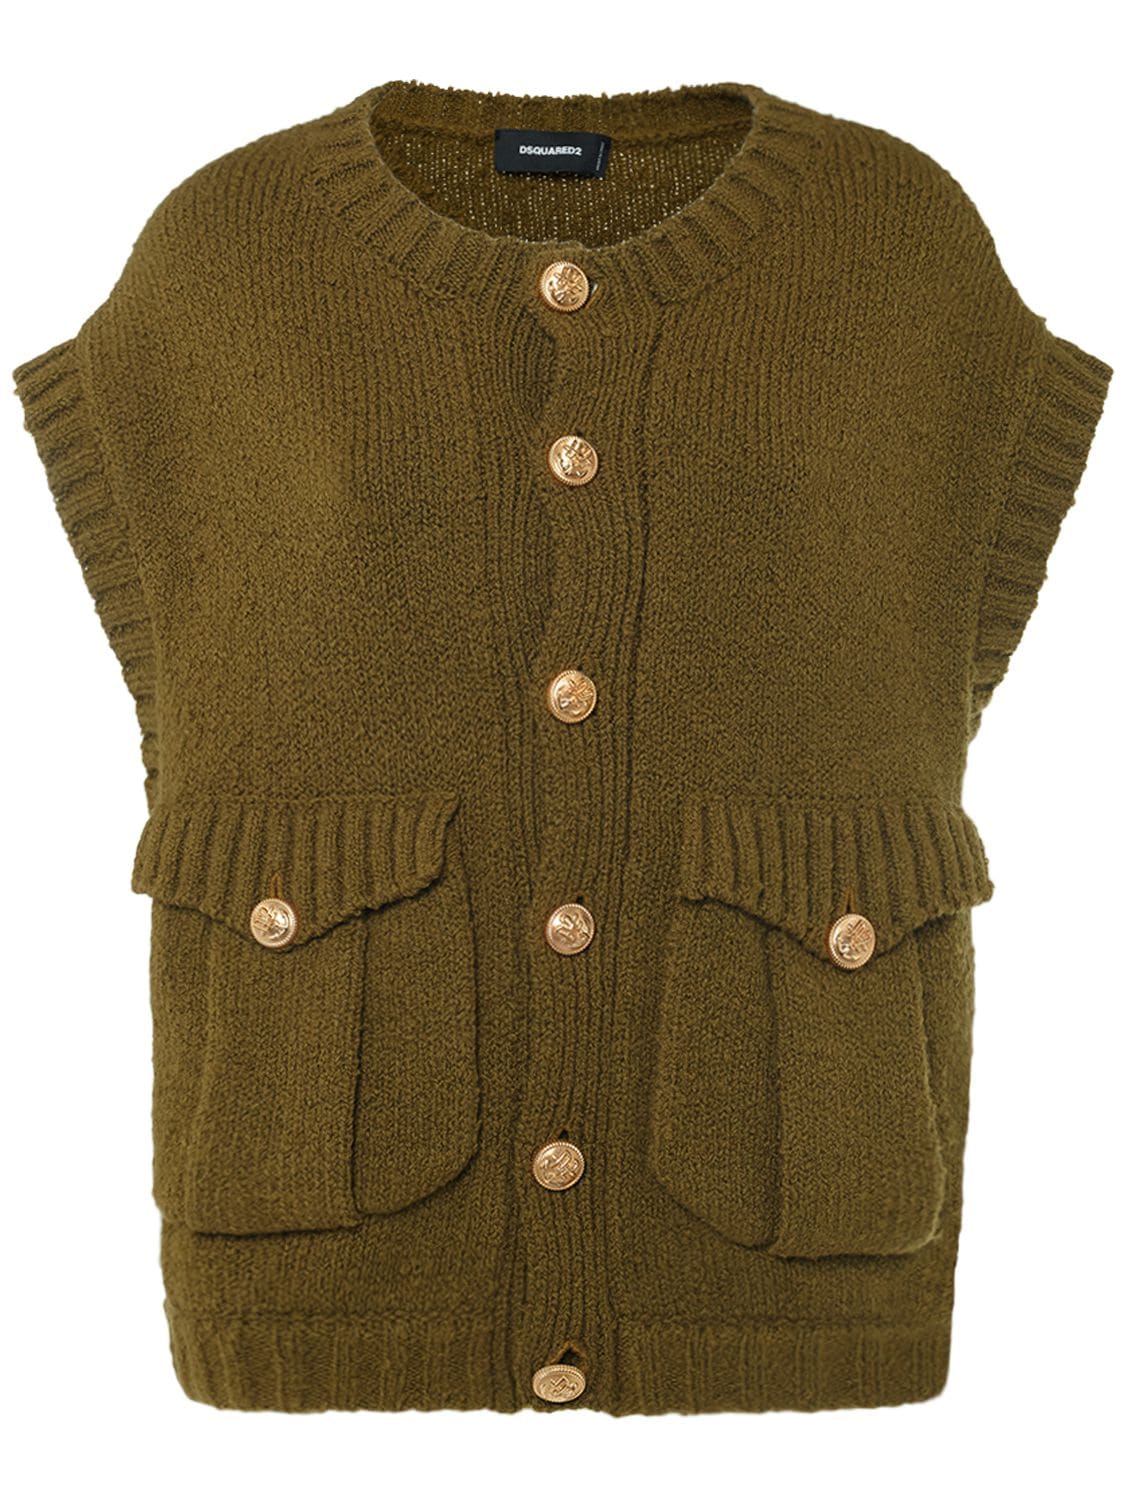 DSQUARED2 BUTTONED WOOL KNIT CARDIGAN VEST